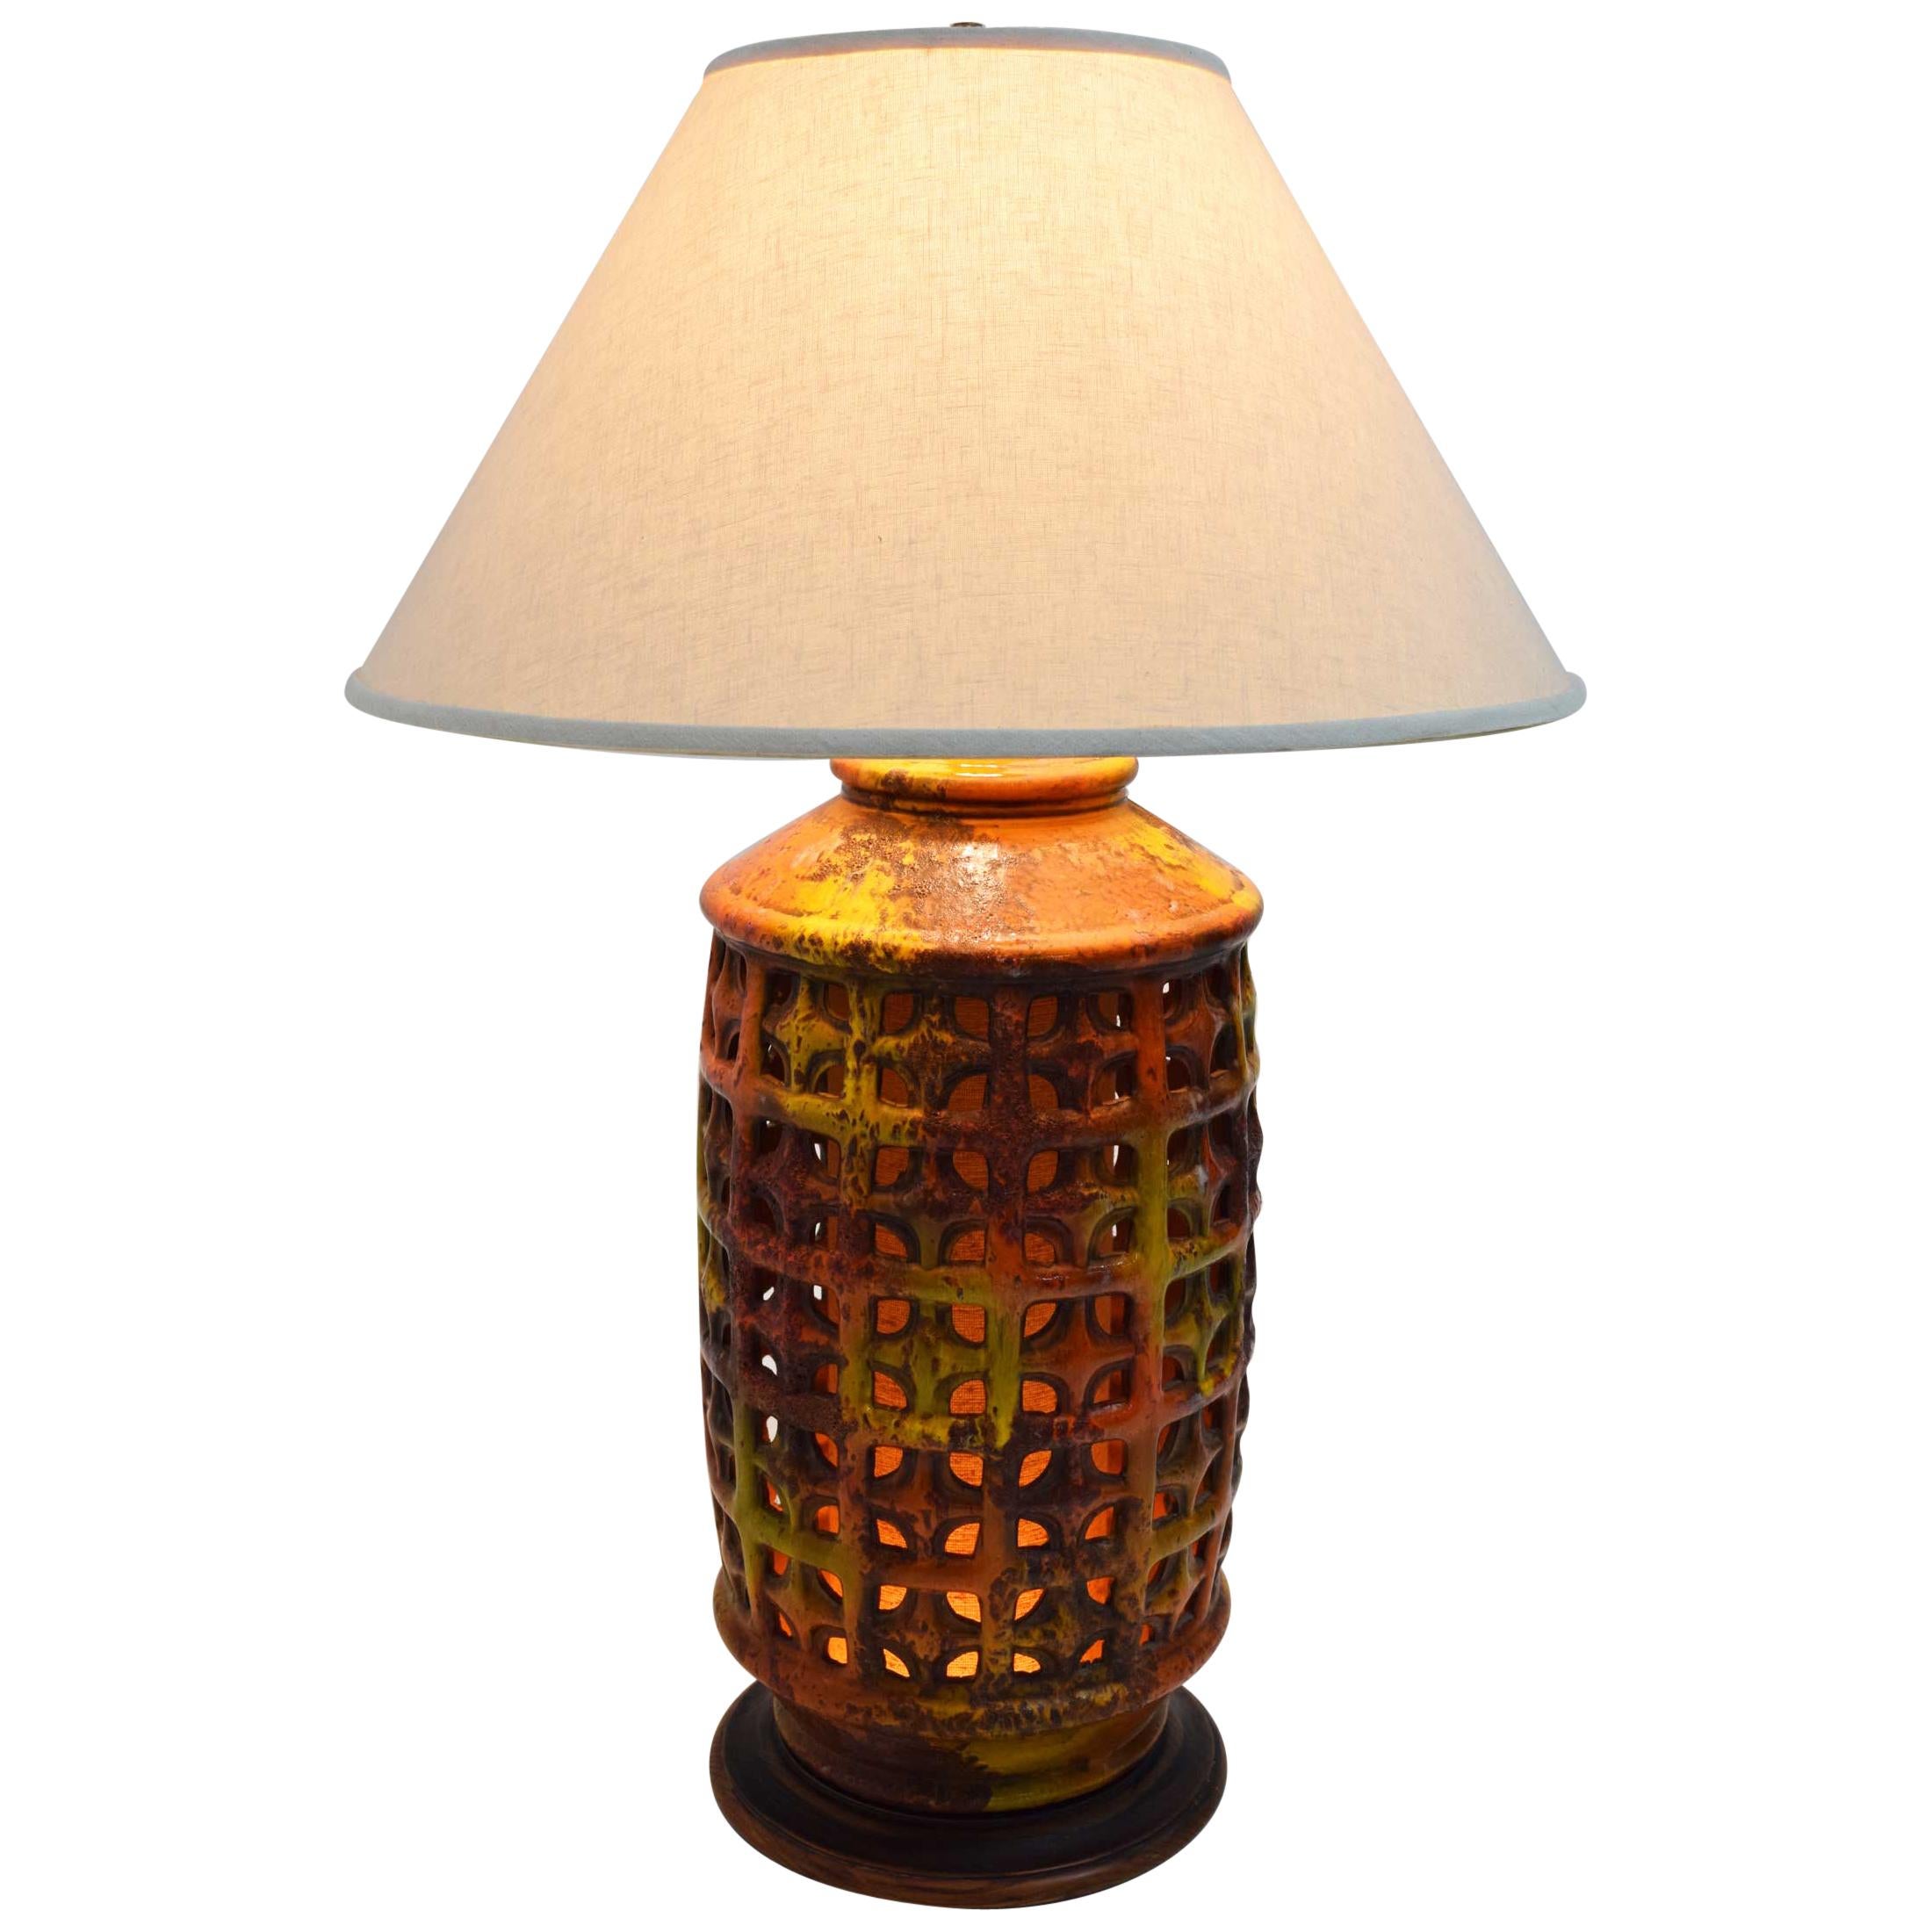 Mid-Century Modern Large Pierced Ceramic Lamp in Ochre, Paprika, and Caramels For Sale